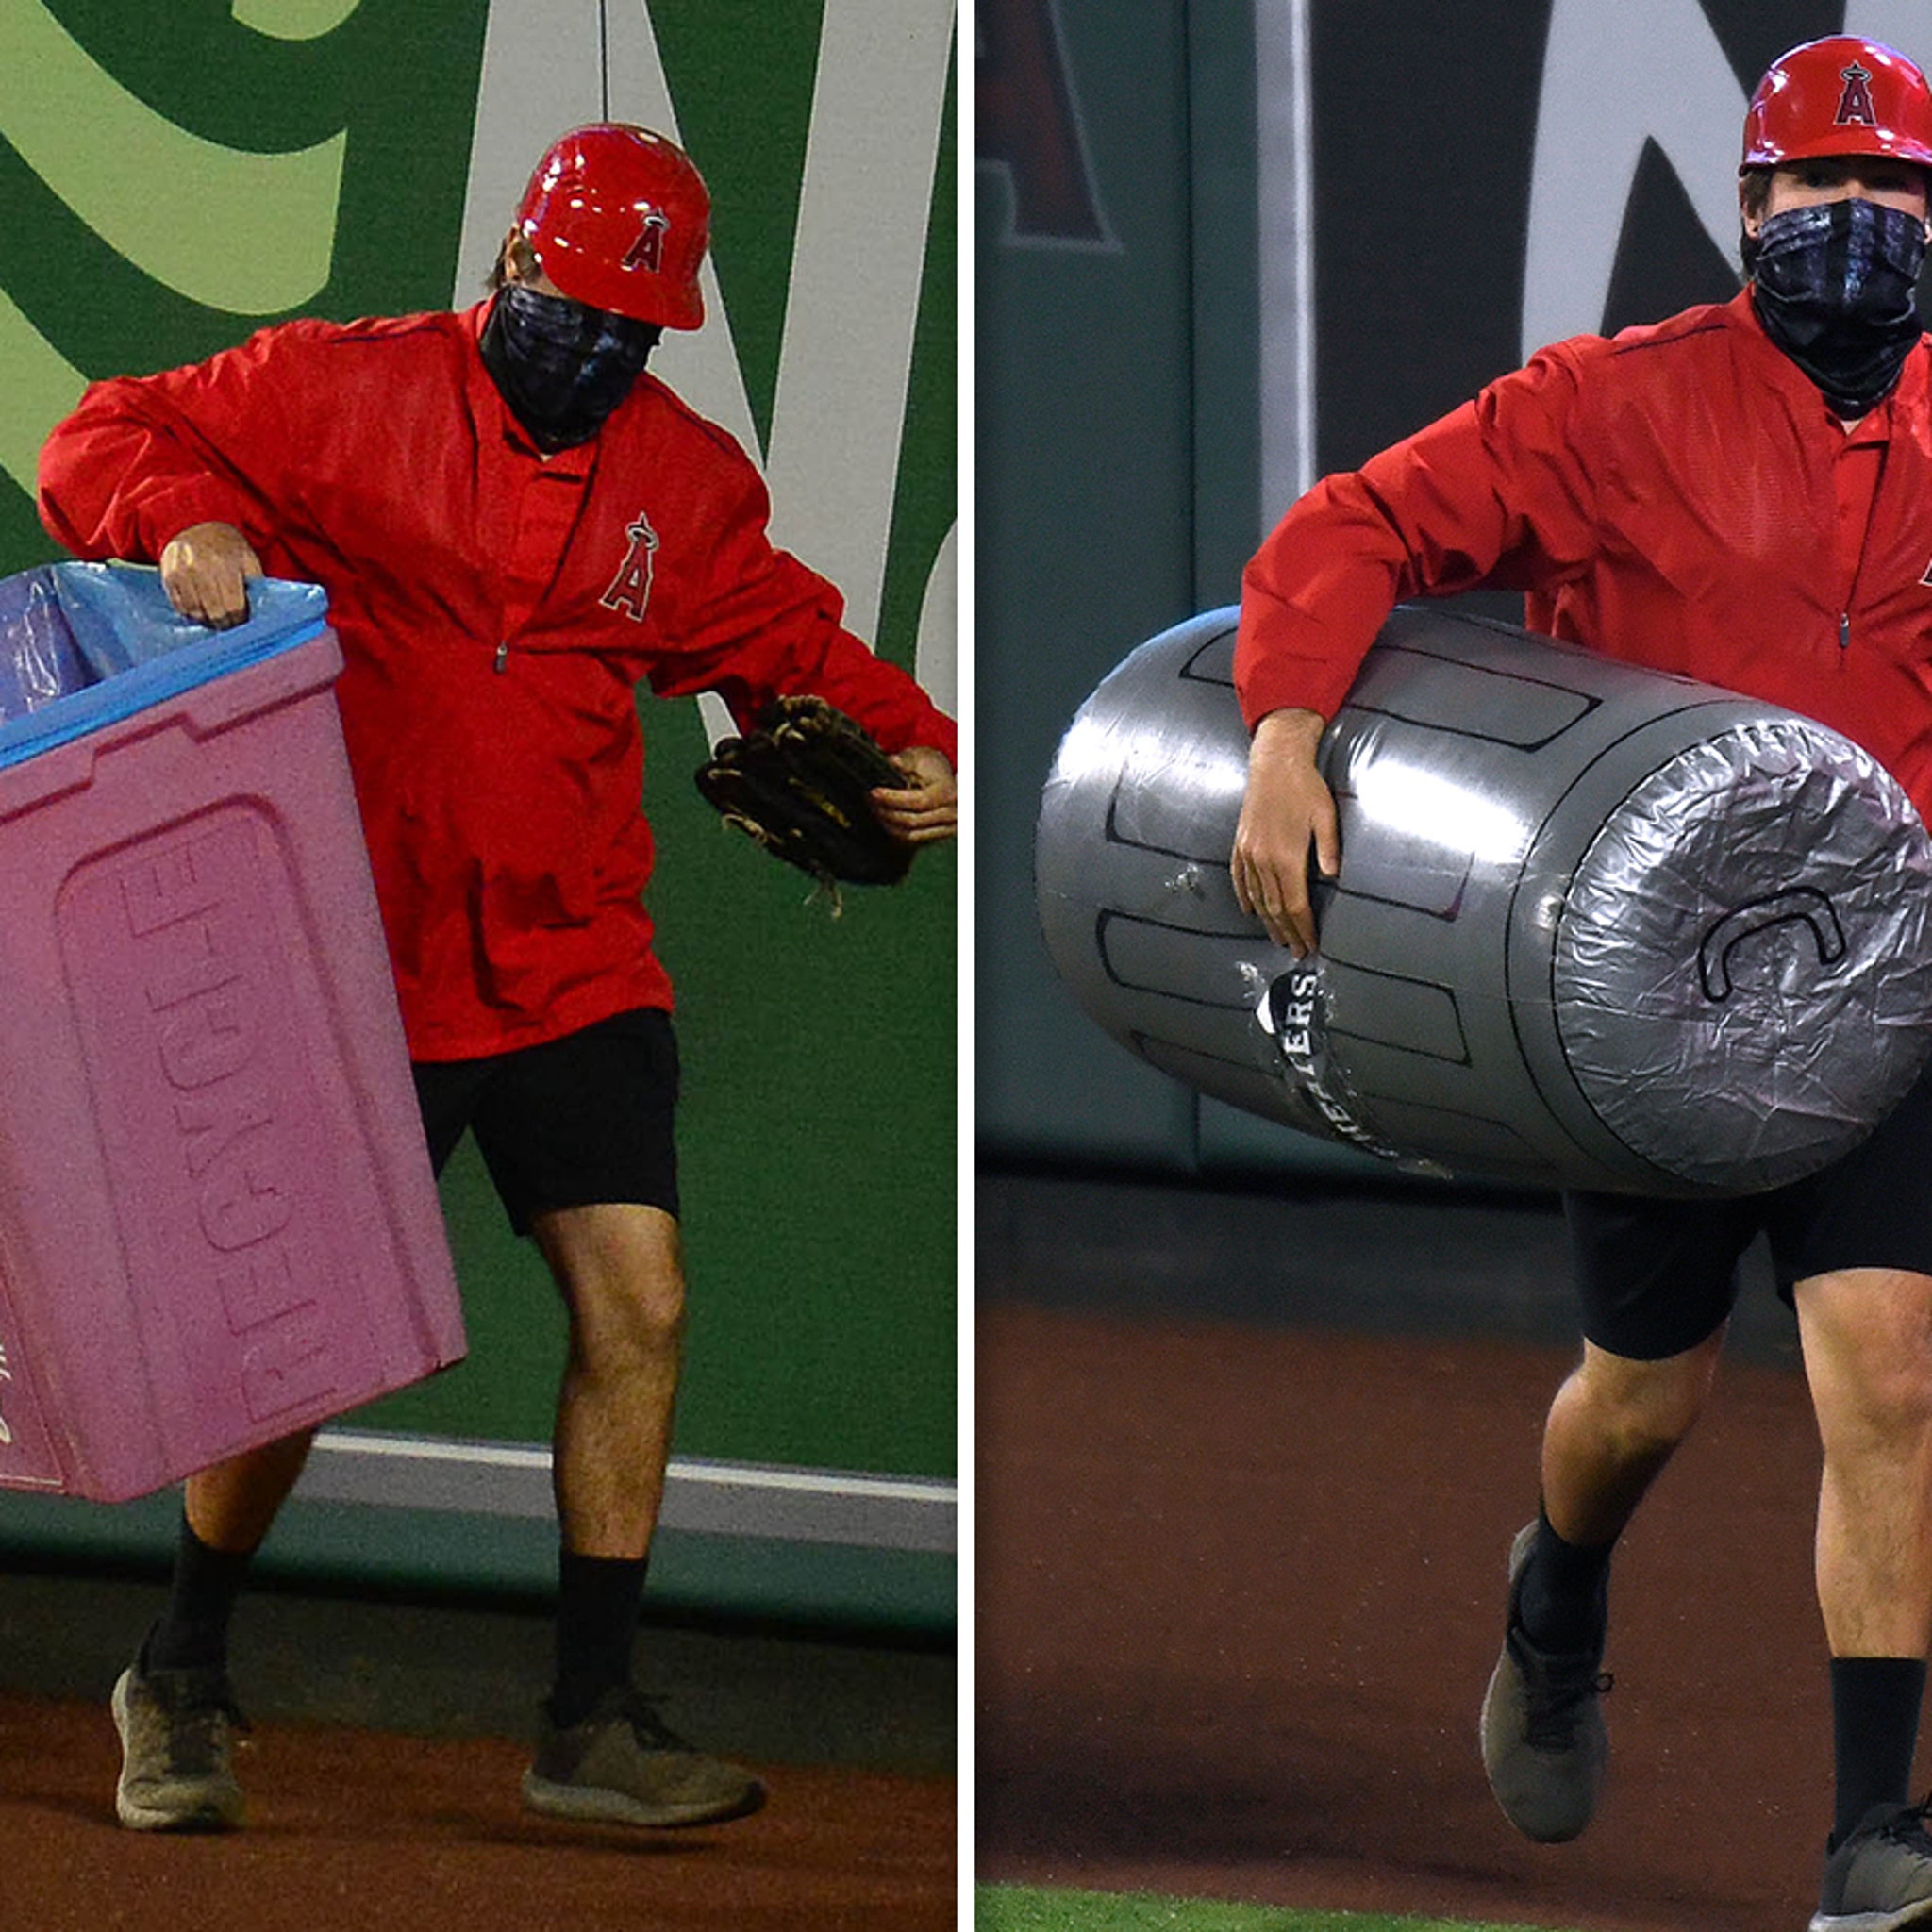 A's subtly troll Astros by putting cutout of mascot in trash can